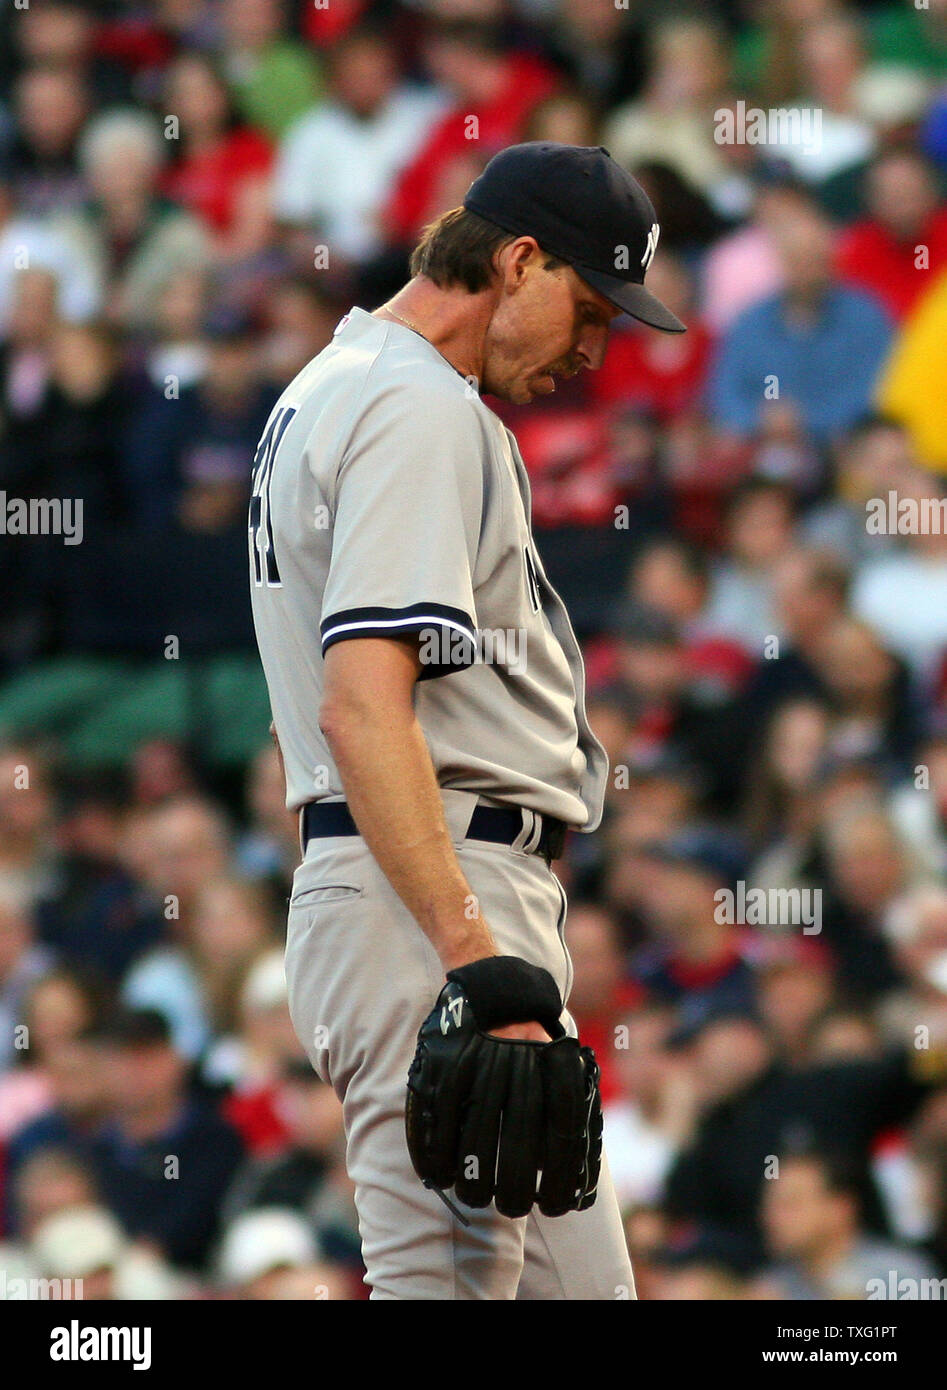 New York Yankees pitcher Randy Johnson hangs his head during the second inning after giving up his second home run of the night to Boston Red Sox first baseman Kevin Youkilis at Fenway Park in Boston on May 24, 2006. (UPI Photo/Katie McMahon) Stock Photo